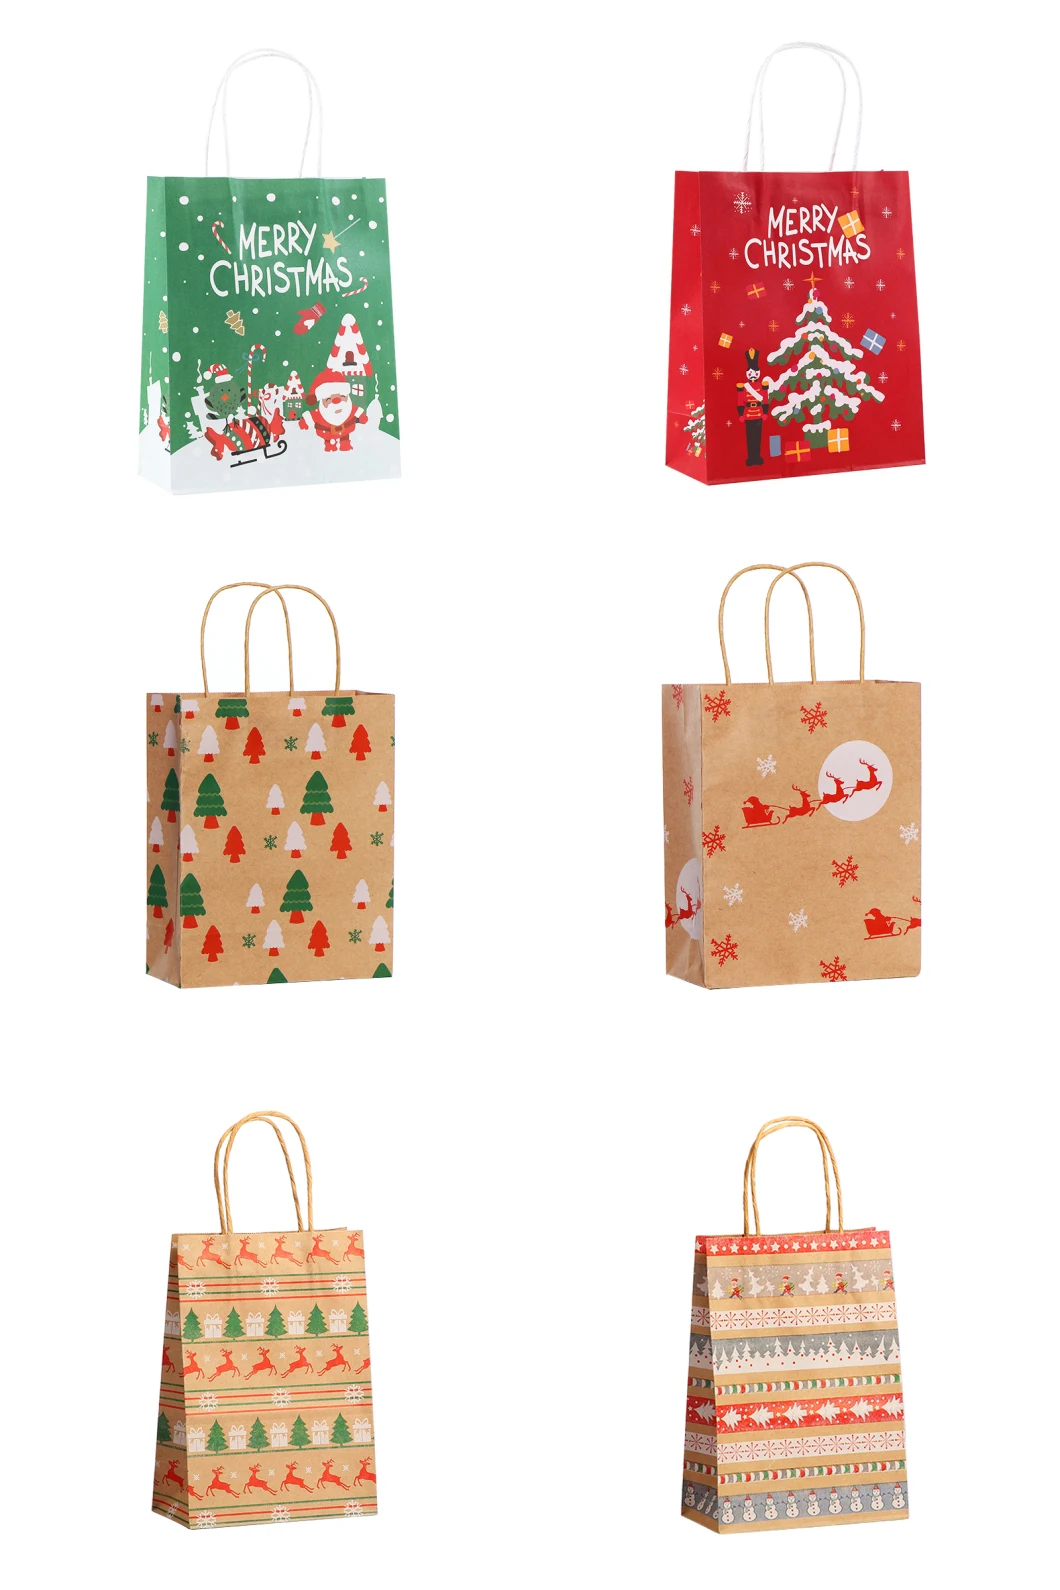 White and Brown Kraft Paper Twisted Handle Shopping Carrier Bag with Logo Printed Christmas Grocery Gift Bags